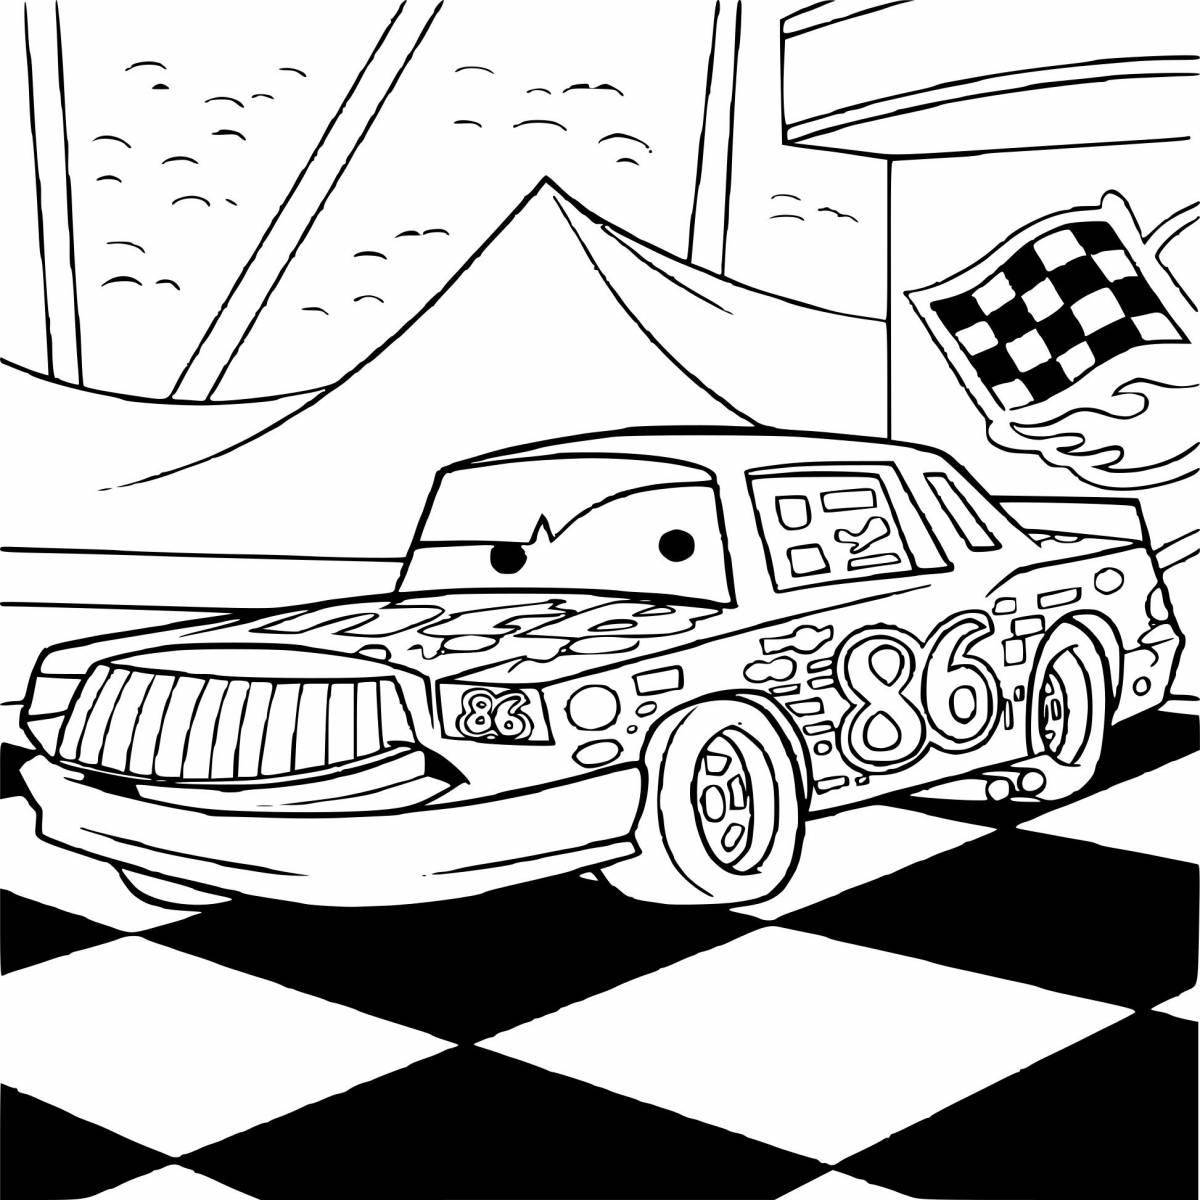 Grand racing 2 coloring page